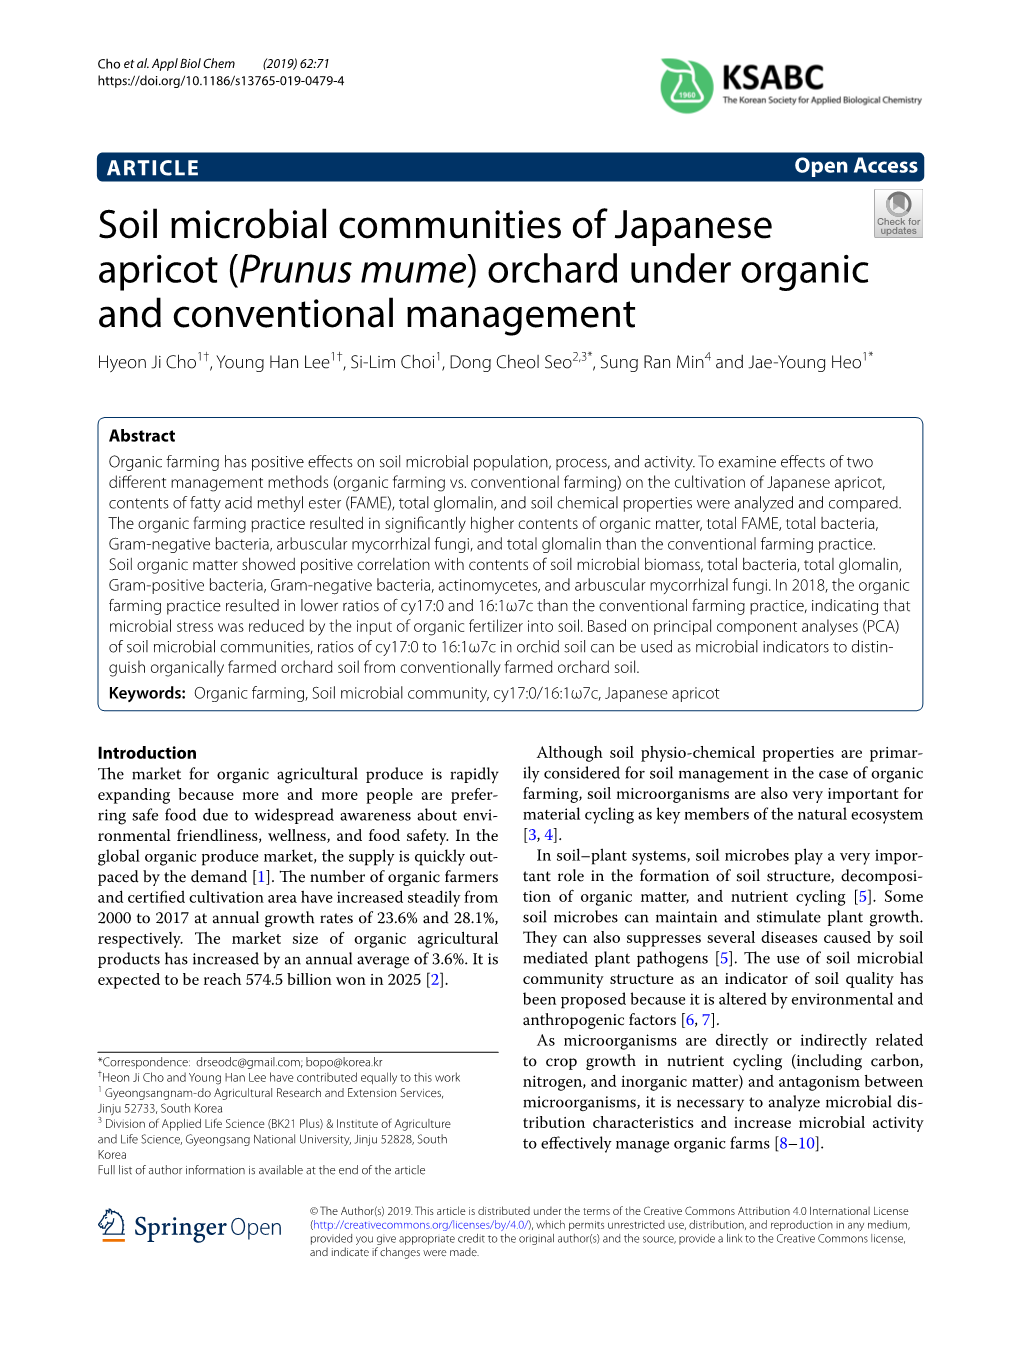 Soil Microbial Communities of Japanese Apricot (Prunus Mume) Orchard Under Organic and Conventional Management